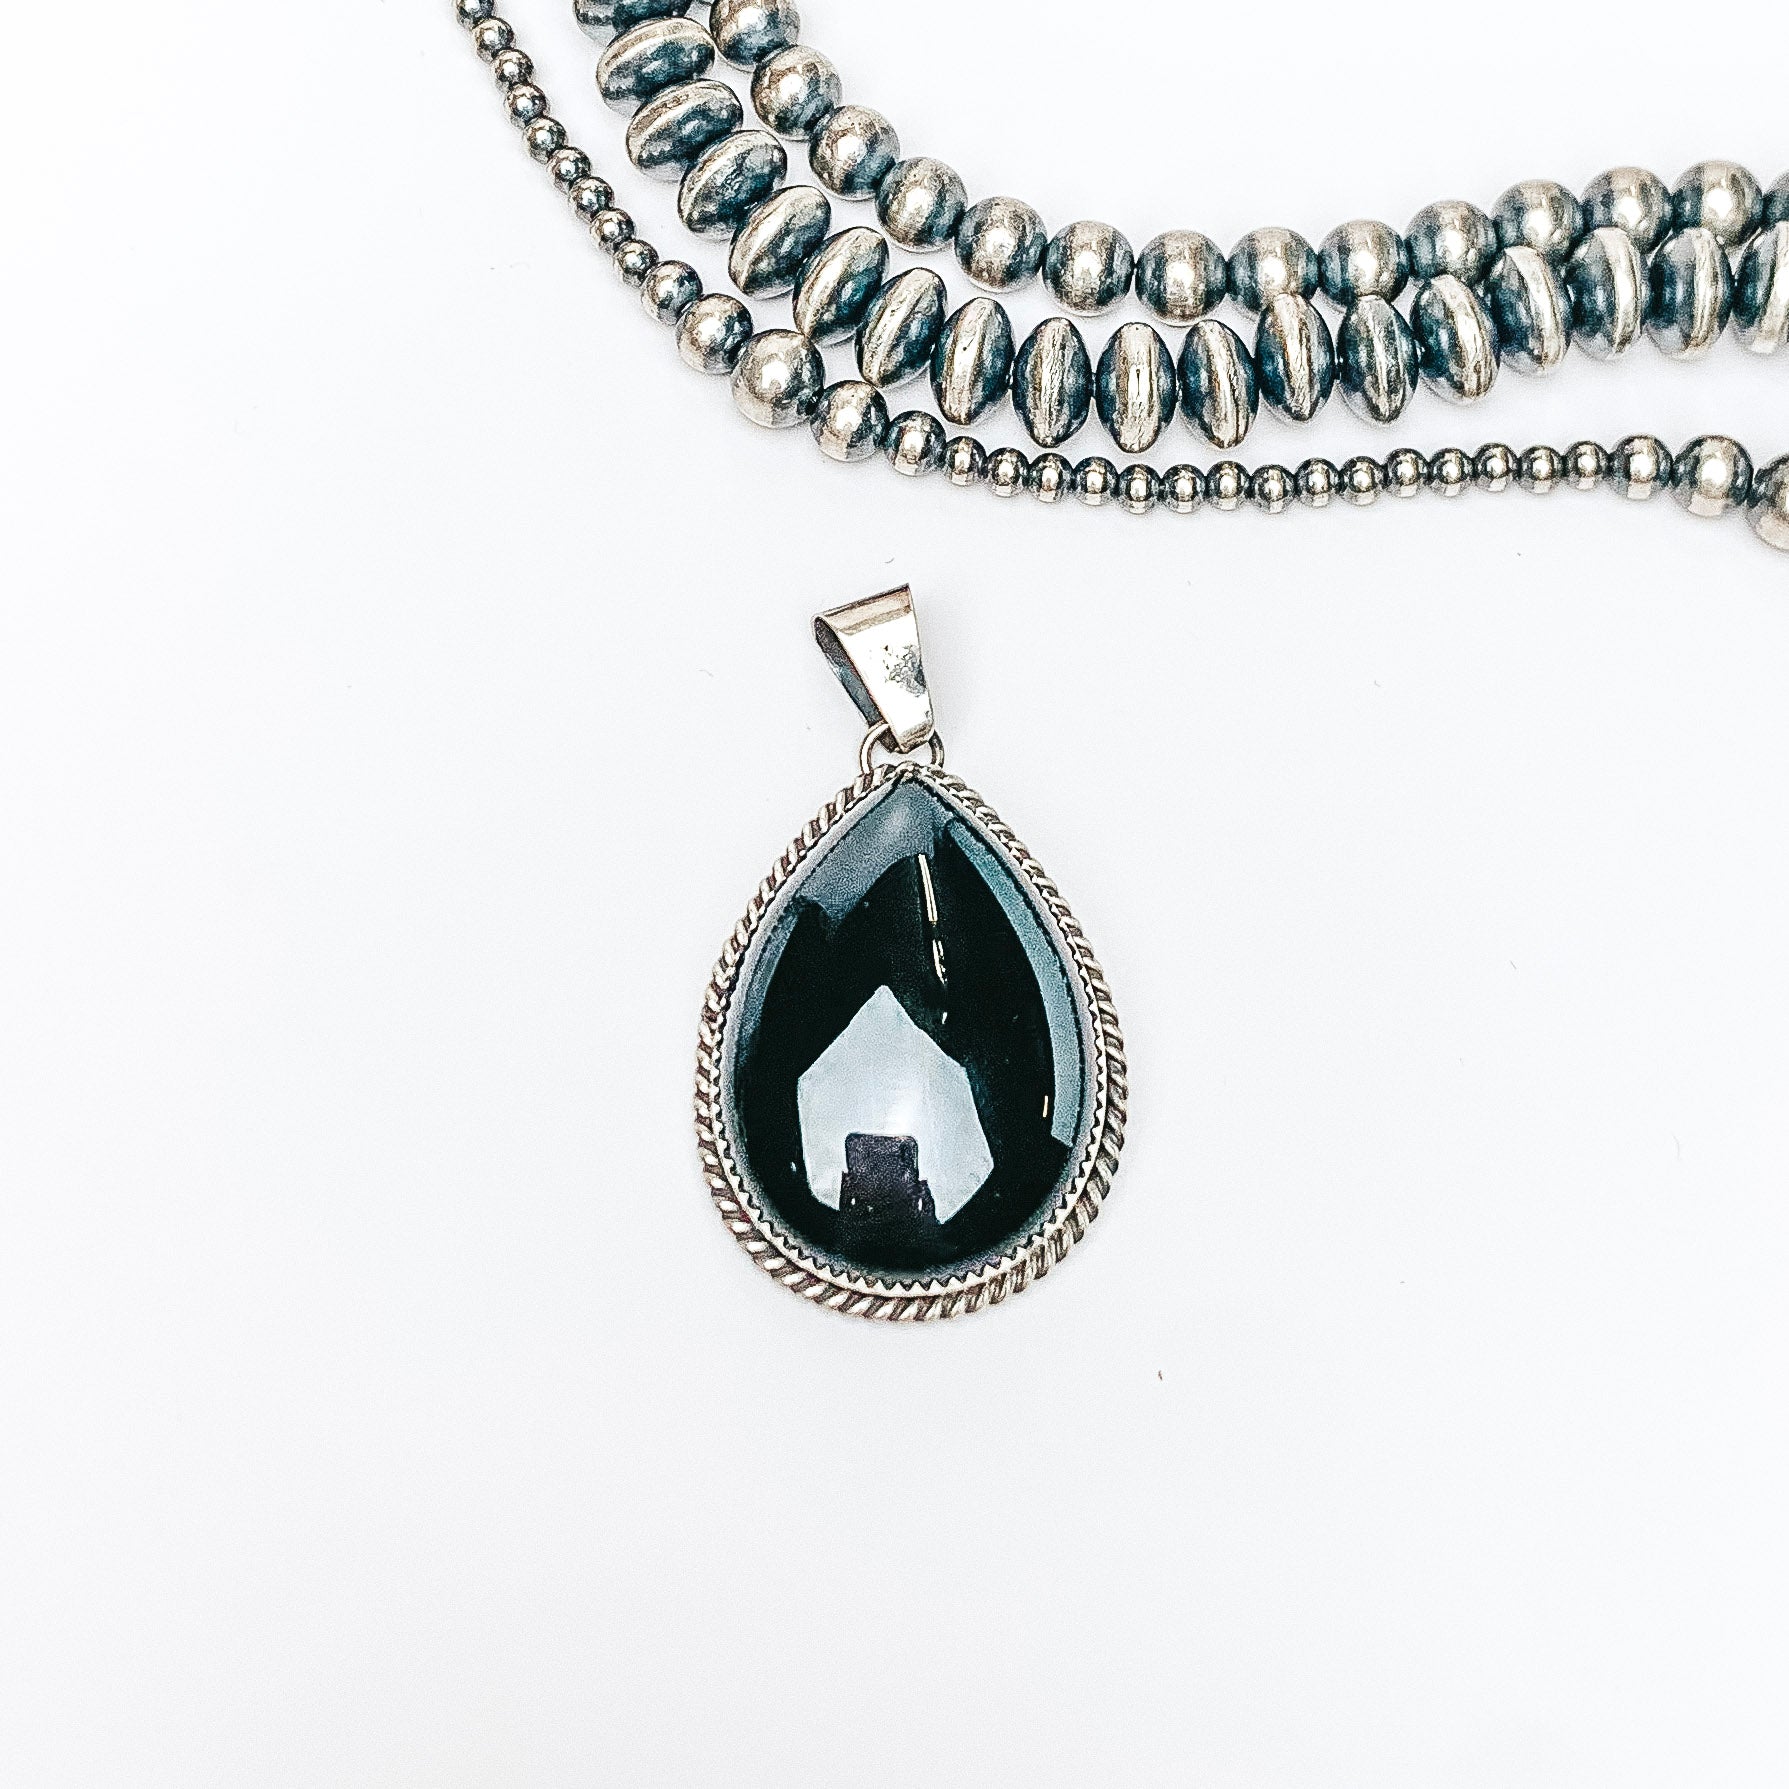 Centered in the picture is a black onyx teardrop pendant. Above the pendant is various sized navajo pearls. All on a white background. 